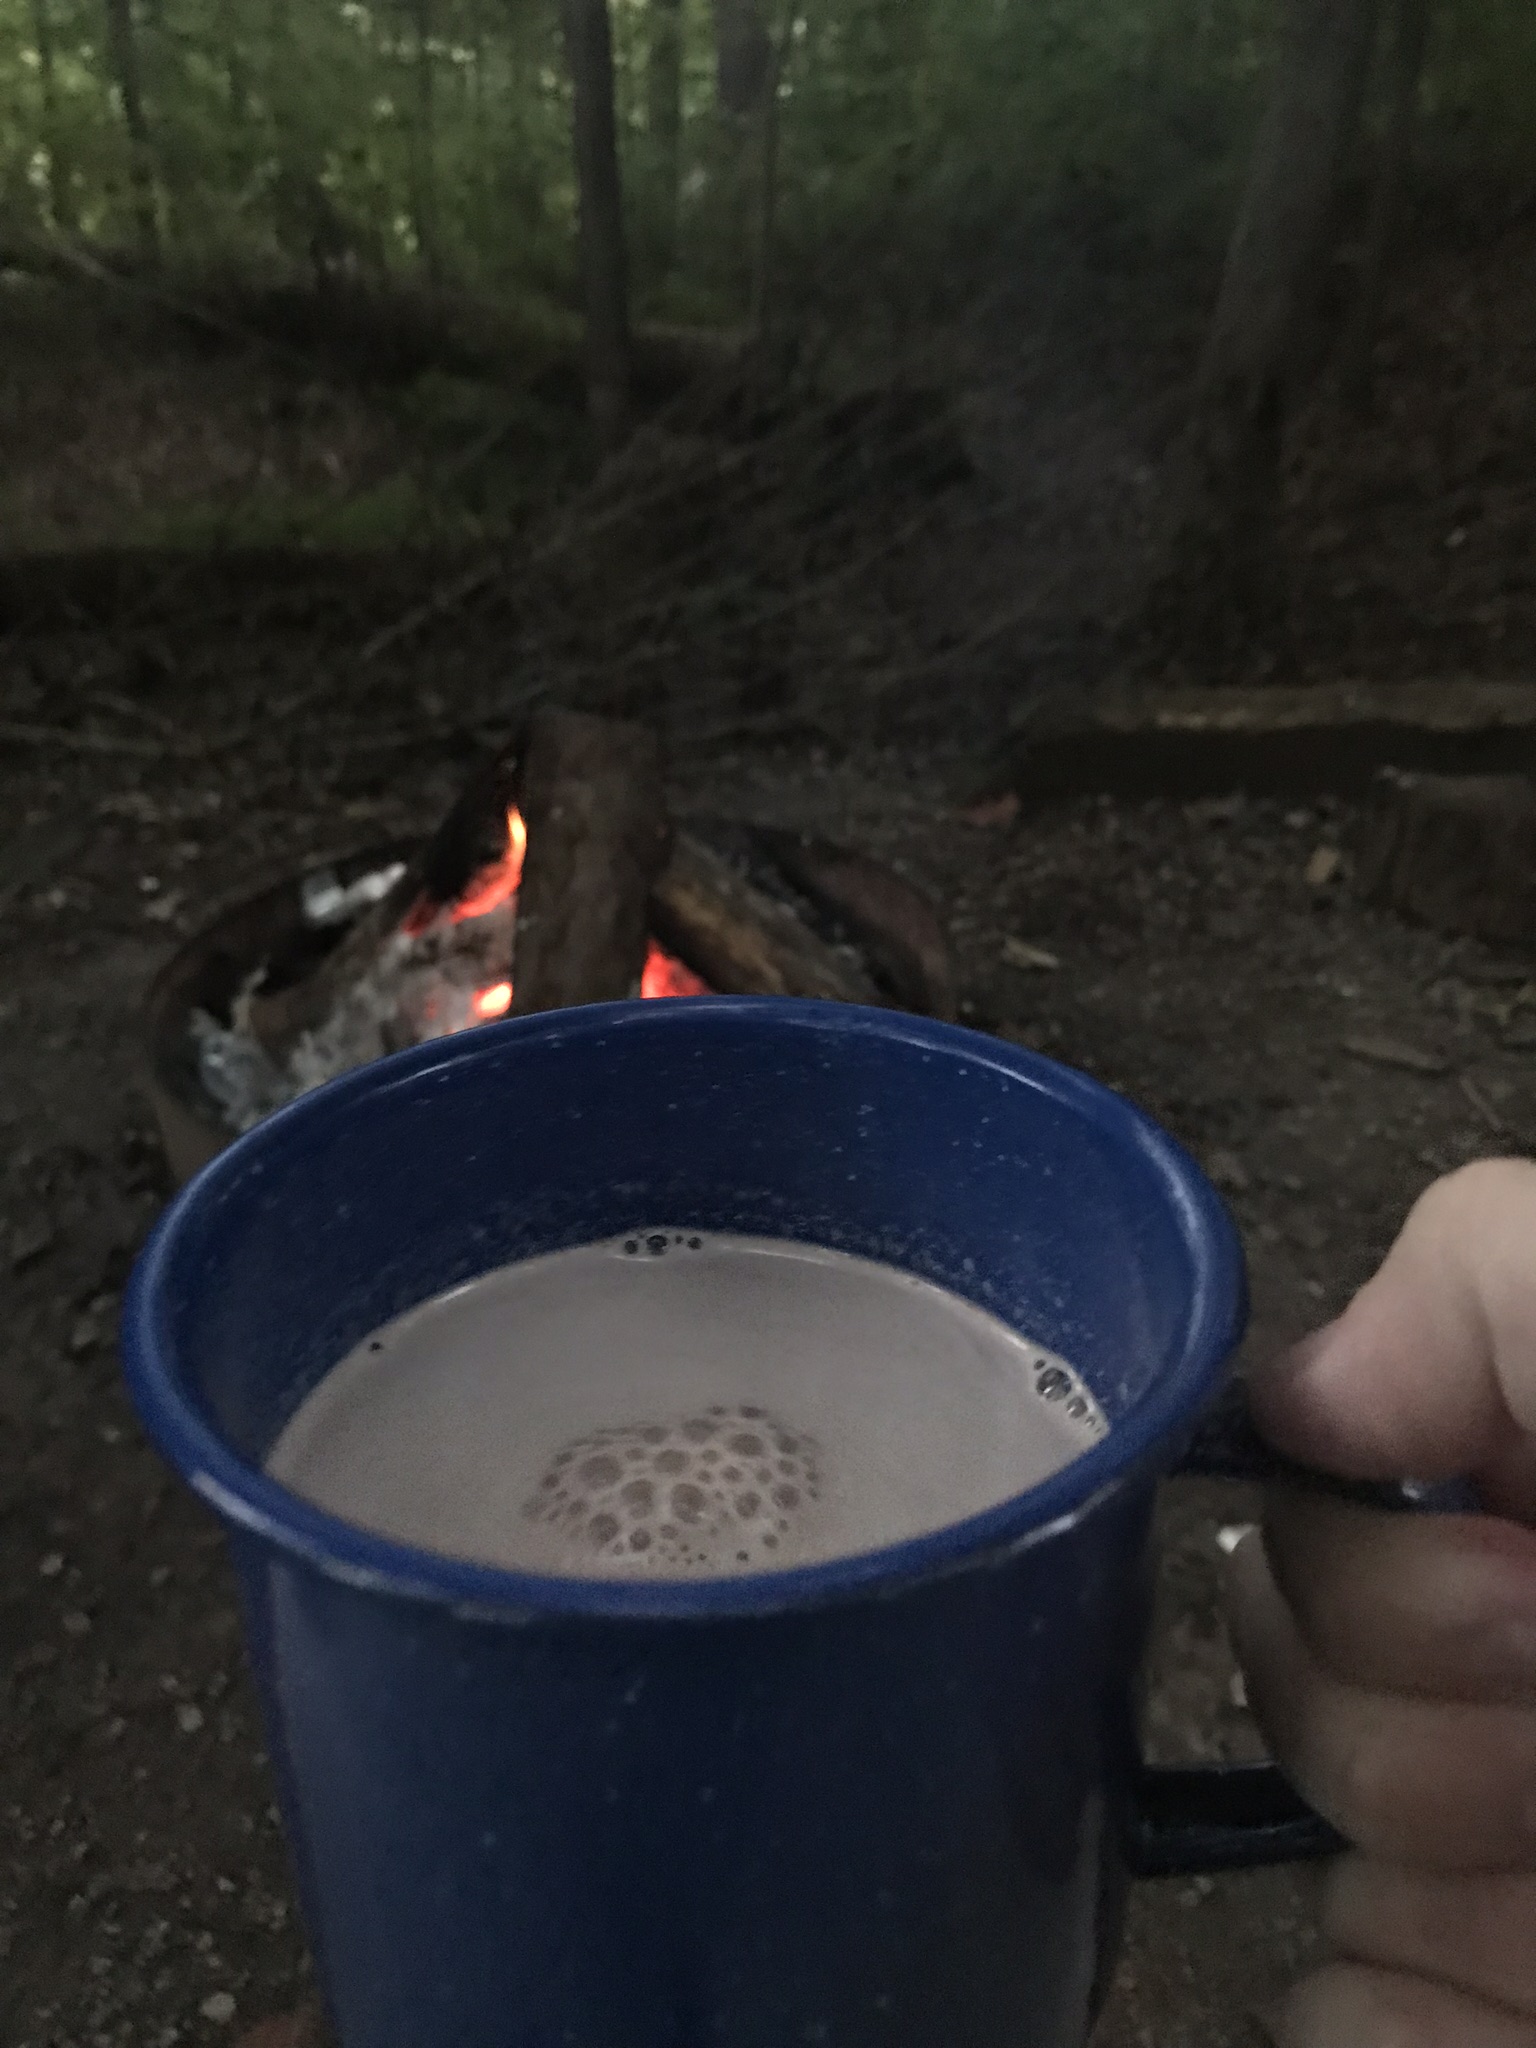 Hot chocolate and fire